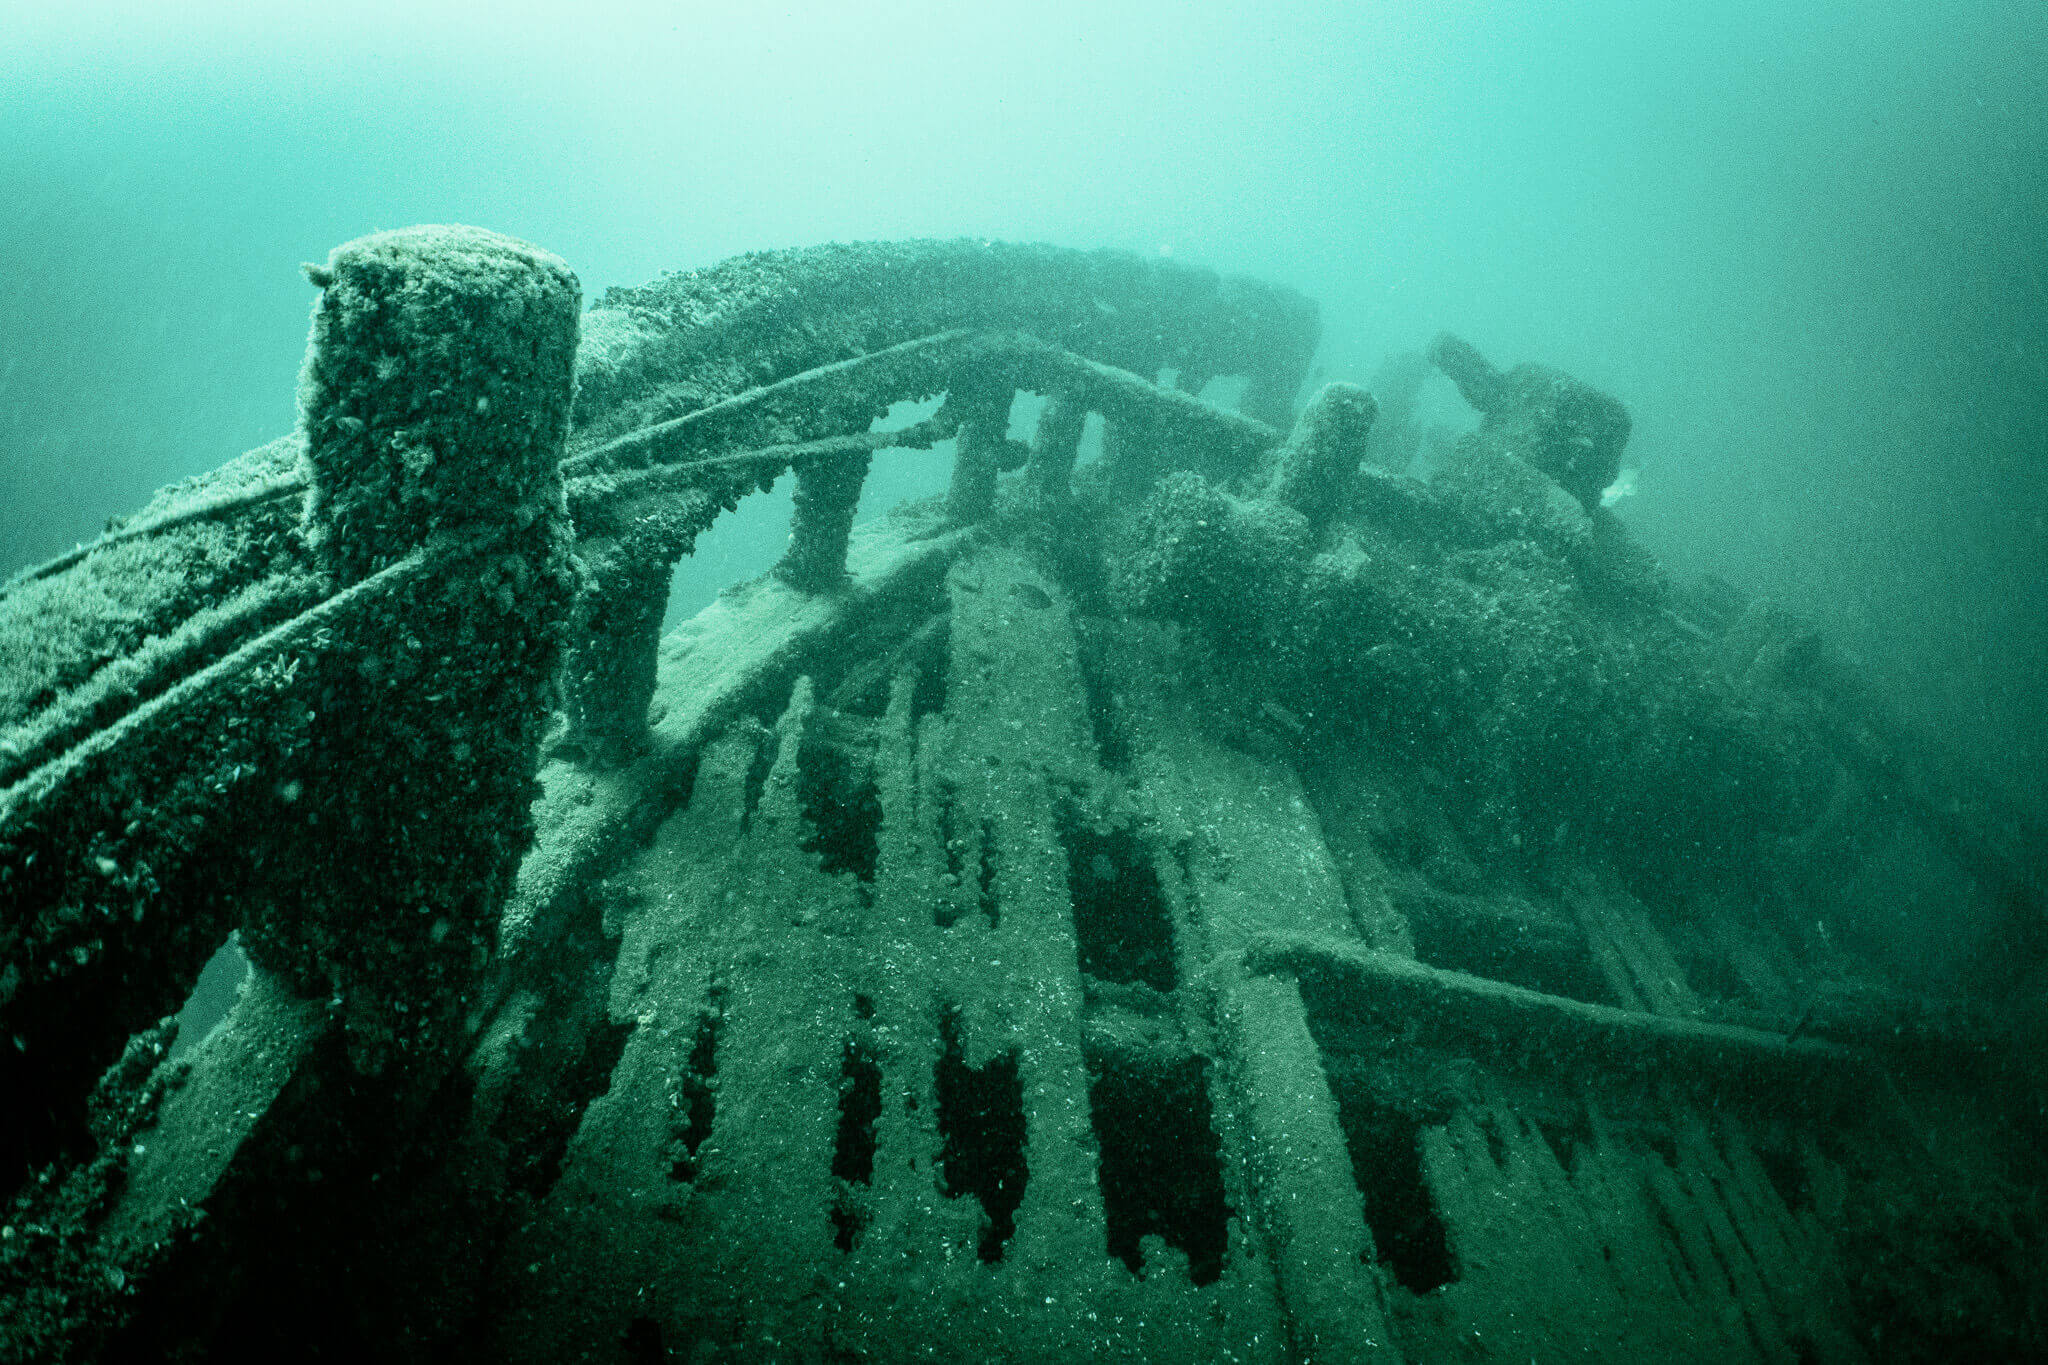 Underwater photo of the bow of the A.E. Vickery shipwreck